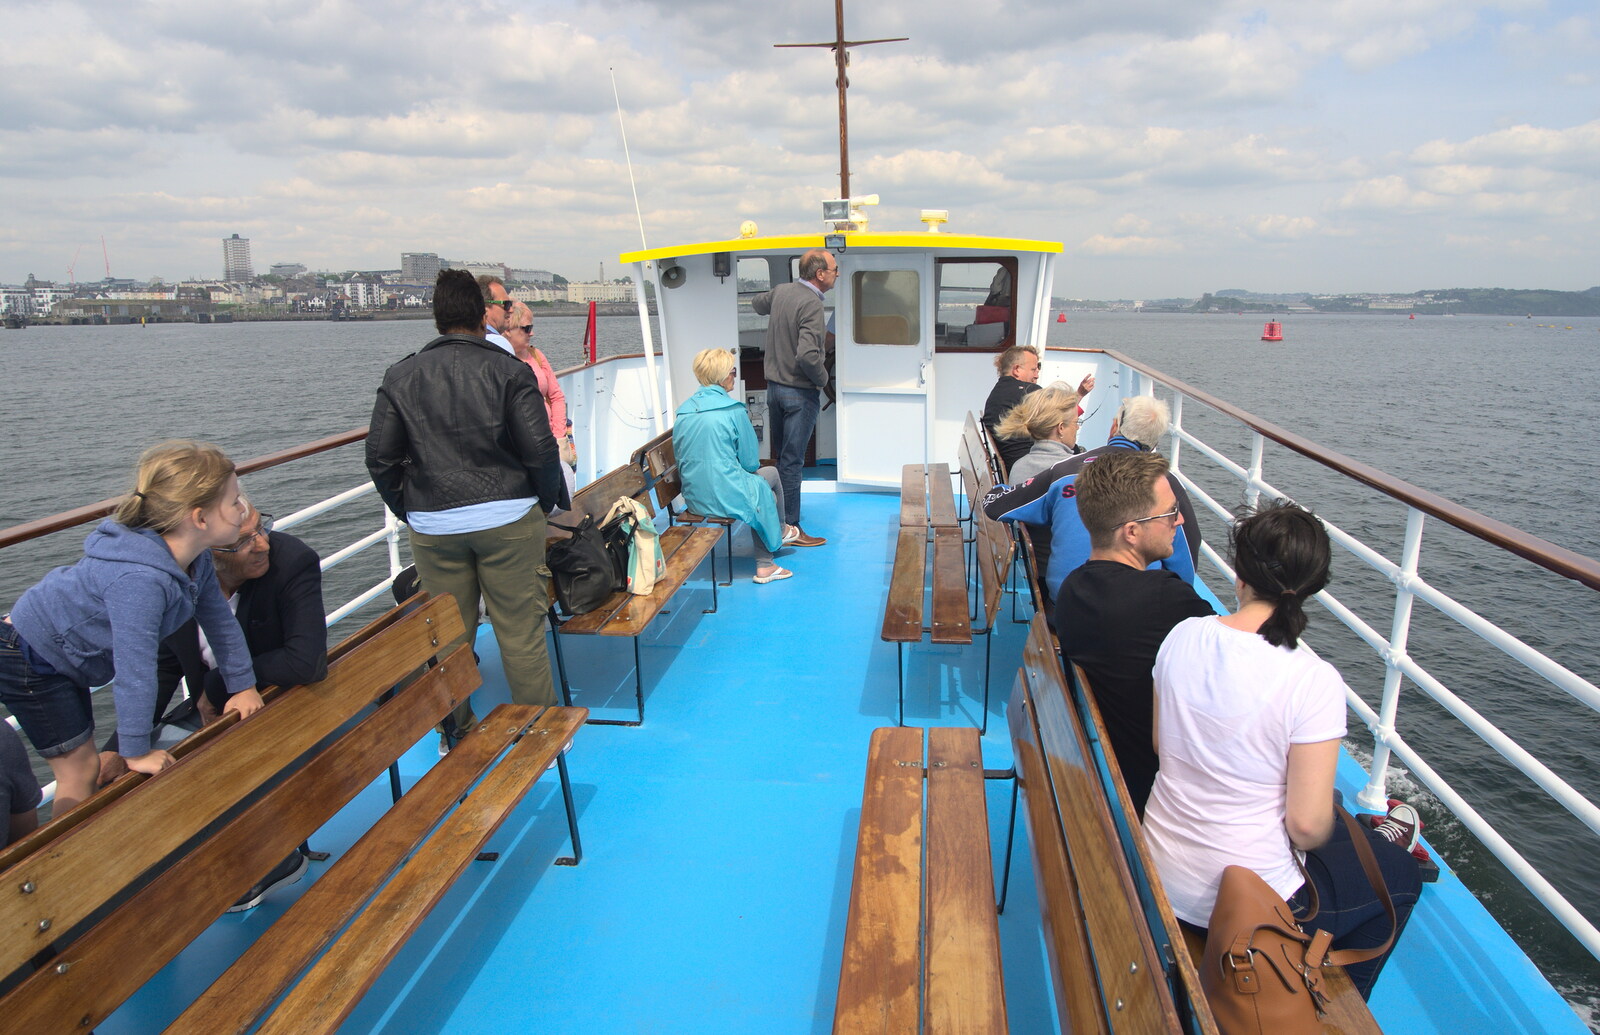 The other passengers on the boat from A Tamar River Trip, Plymouth, Devon - 30th May 2016